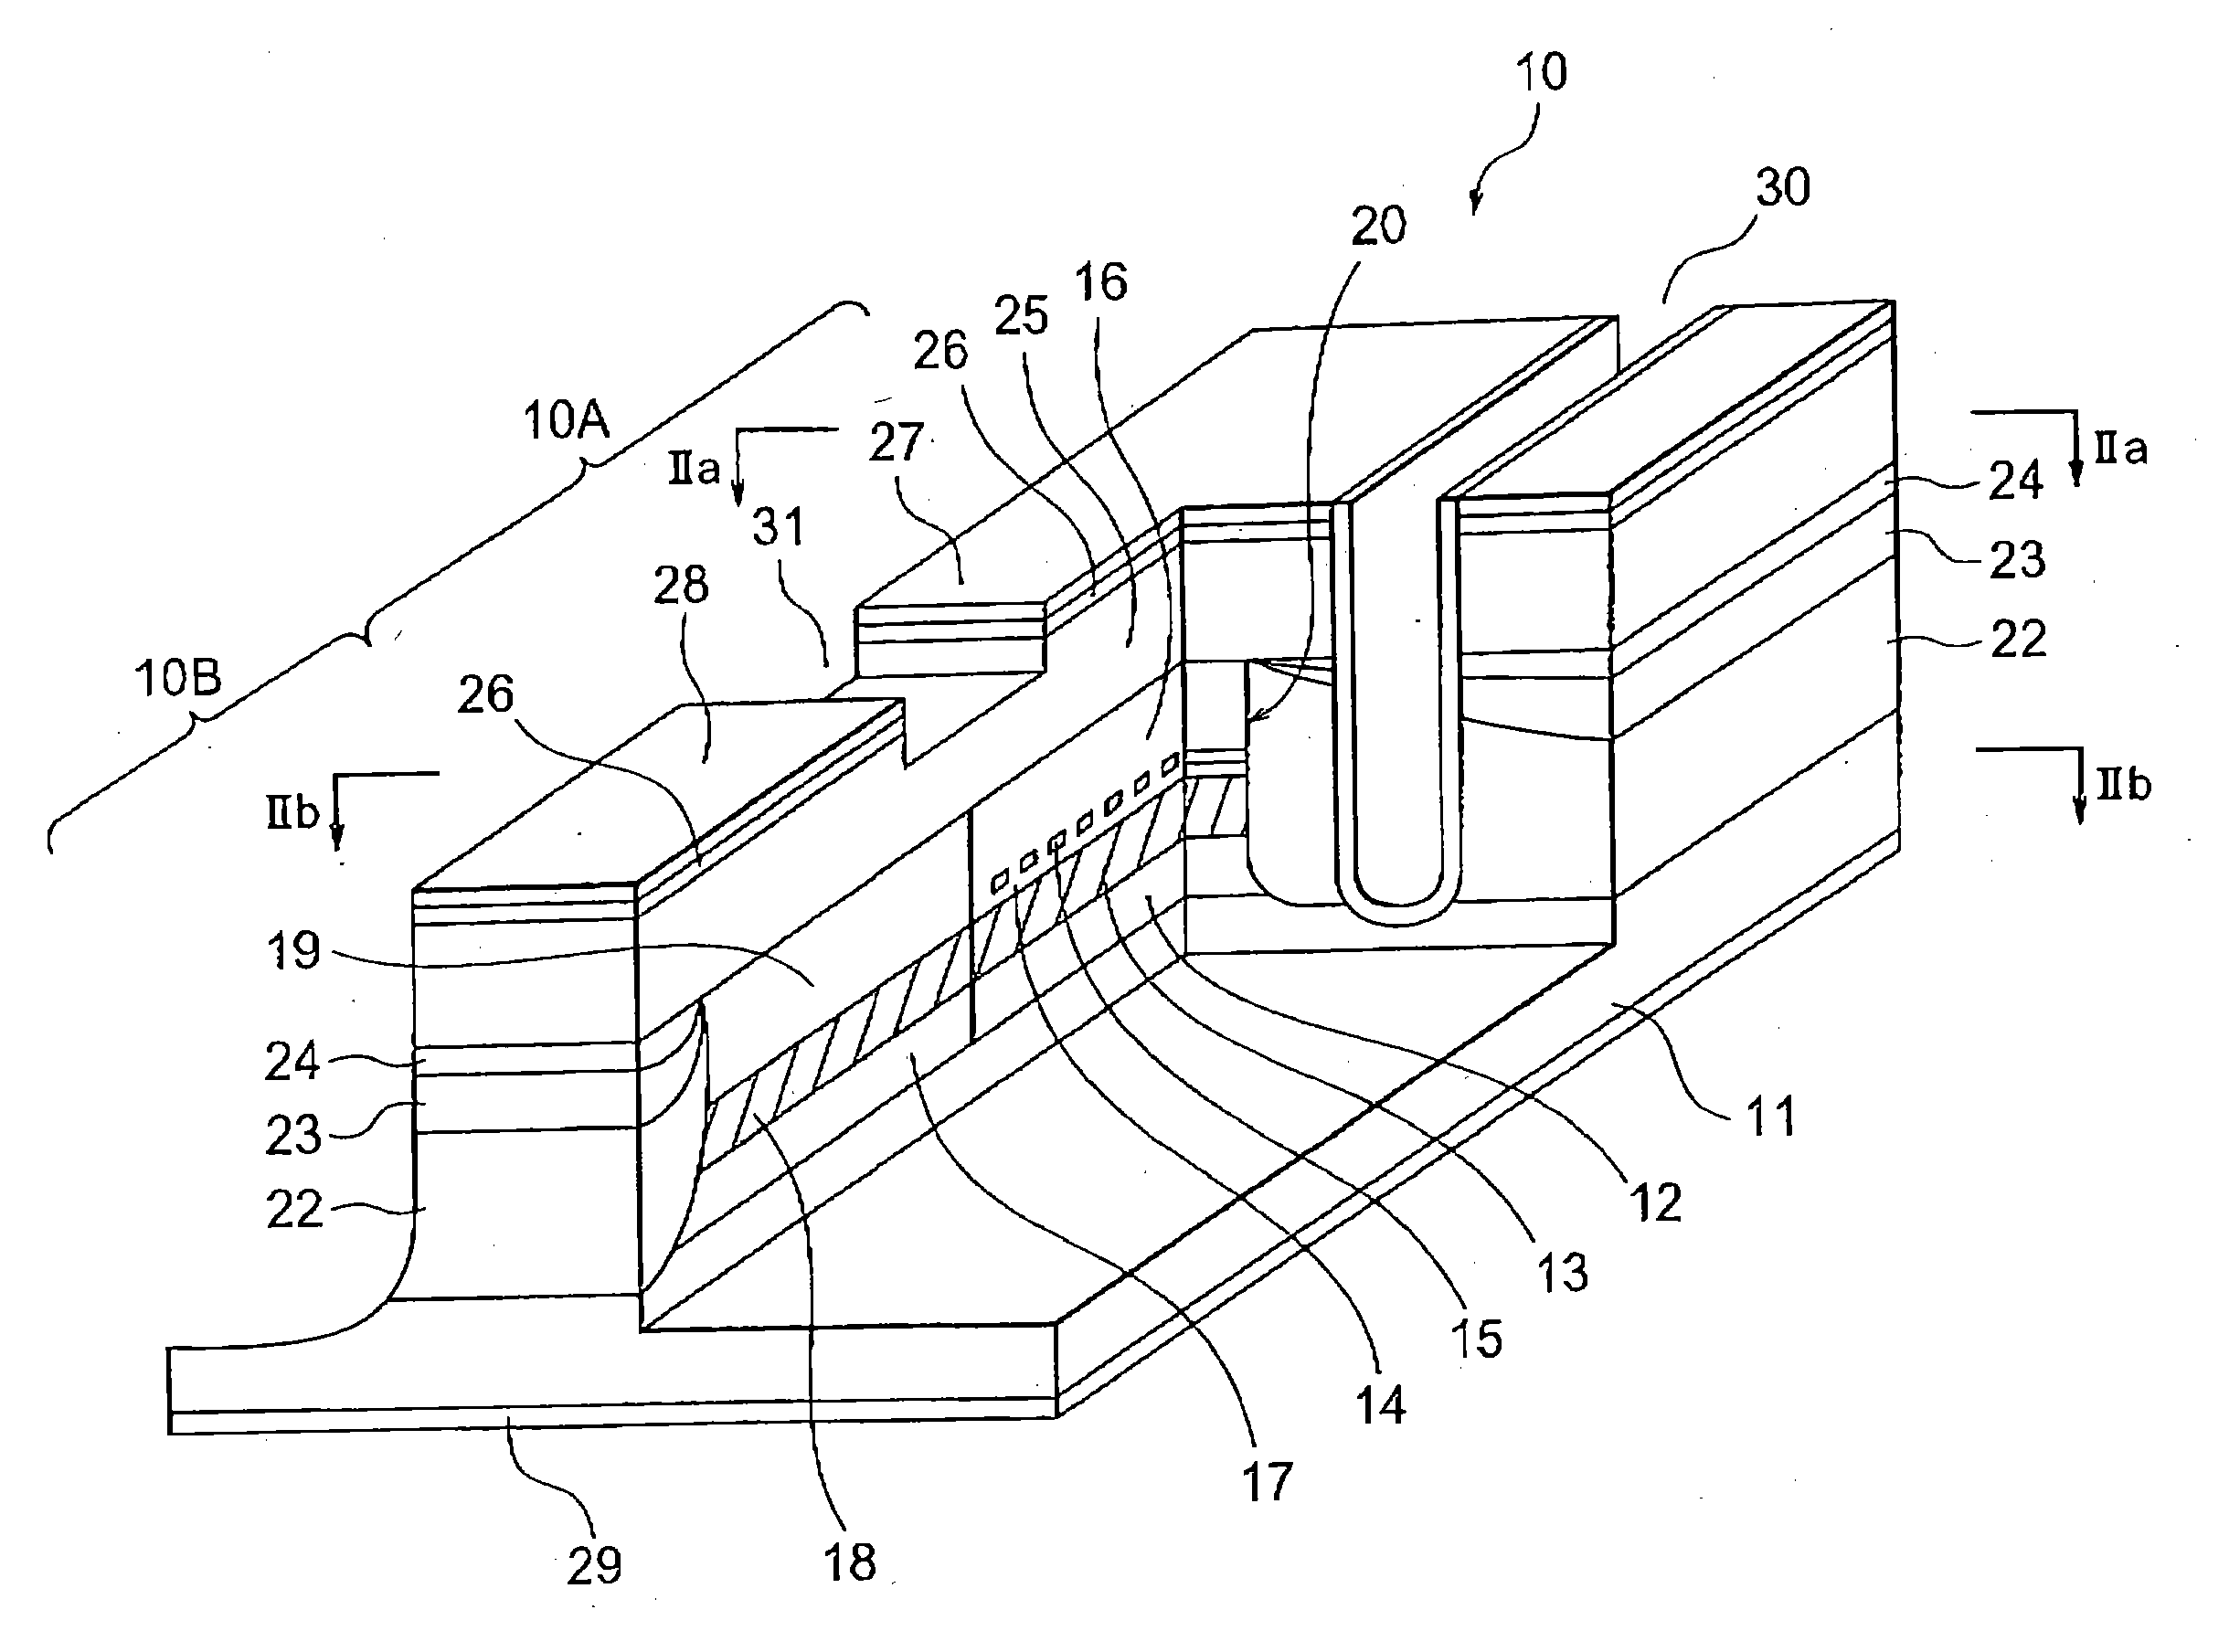 Optical device having a carrier-depleted layer